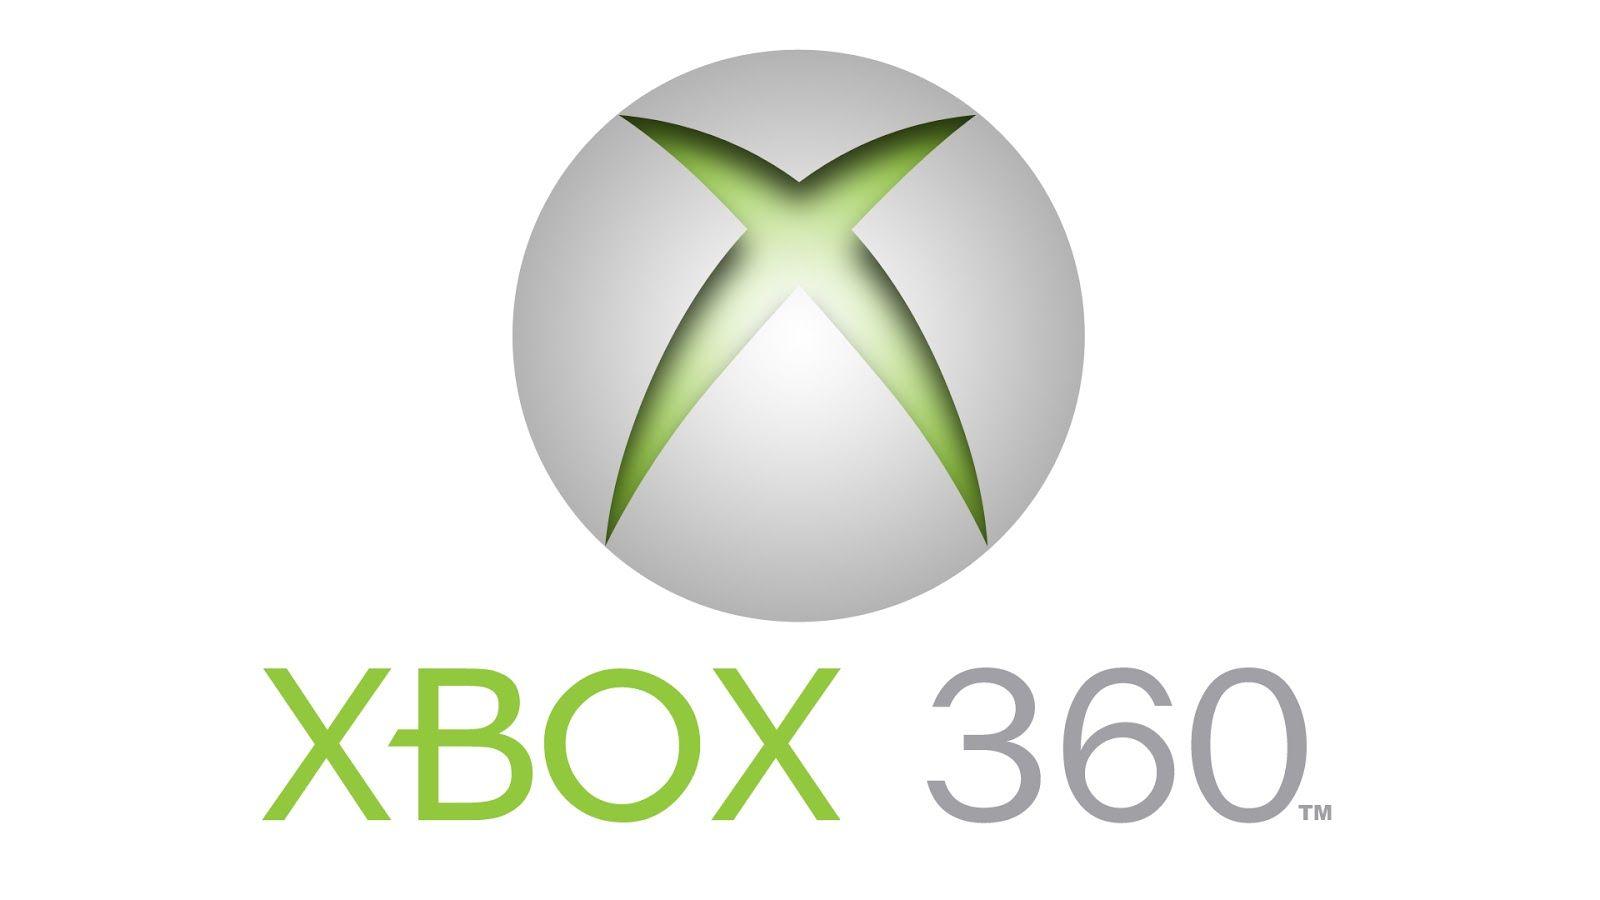 Xbox Live Logo - Contributions of the Xbox 360 in Current and Next Generation Consoles